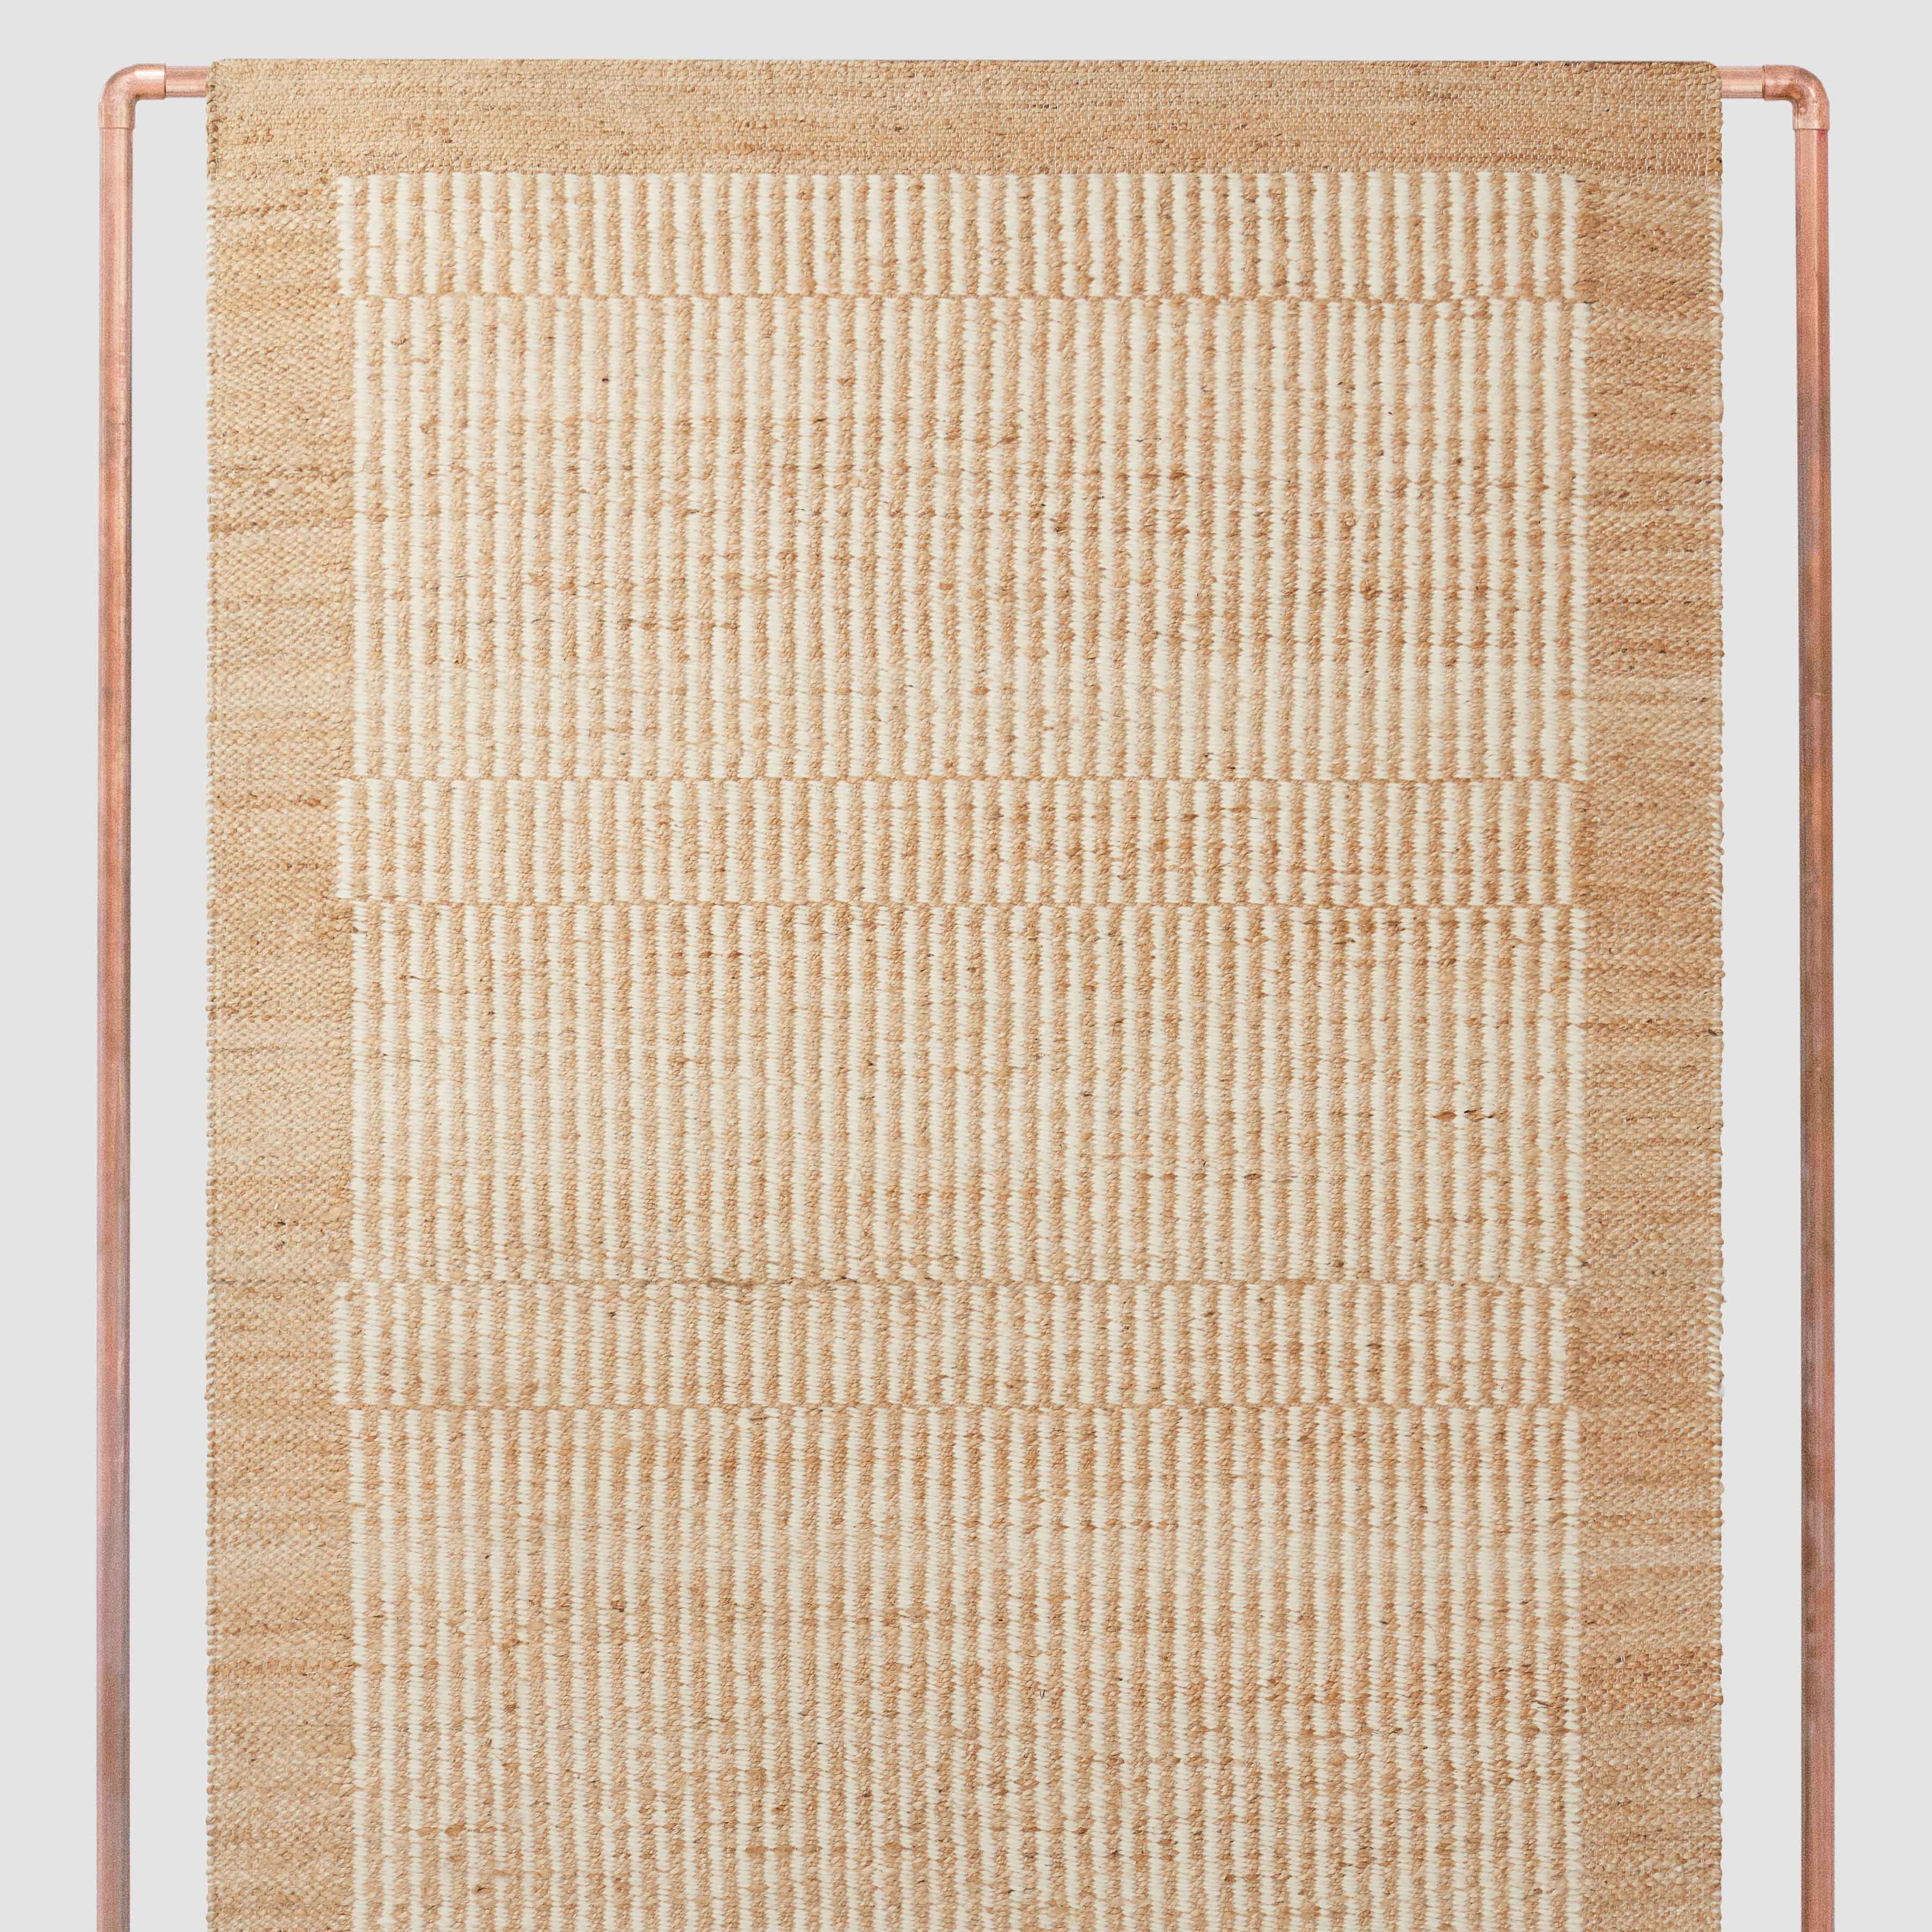 The Citizenry Anita Jute Area Rug | 5' x 8' | Natural - Image 0